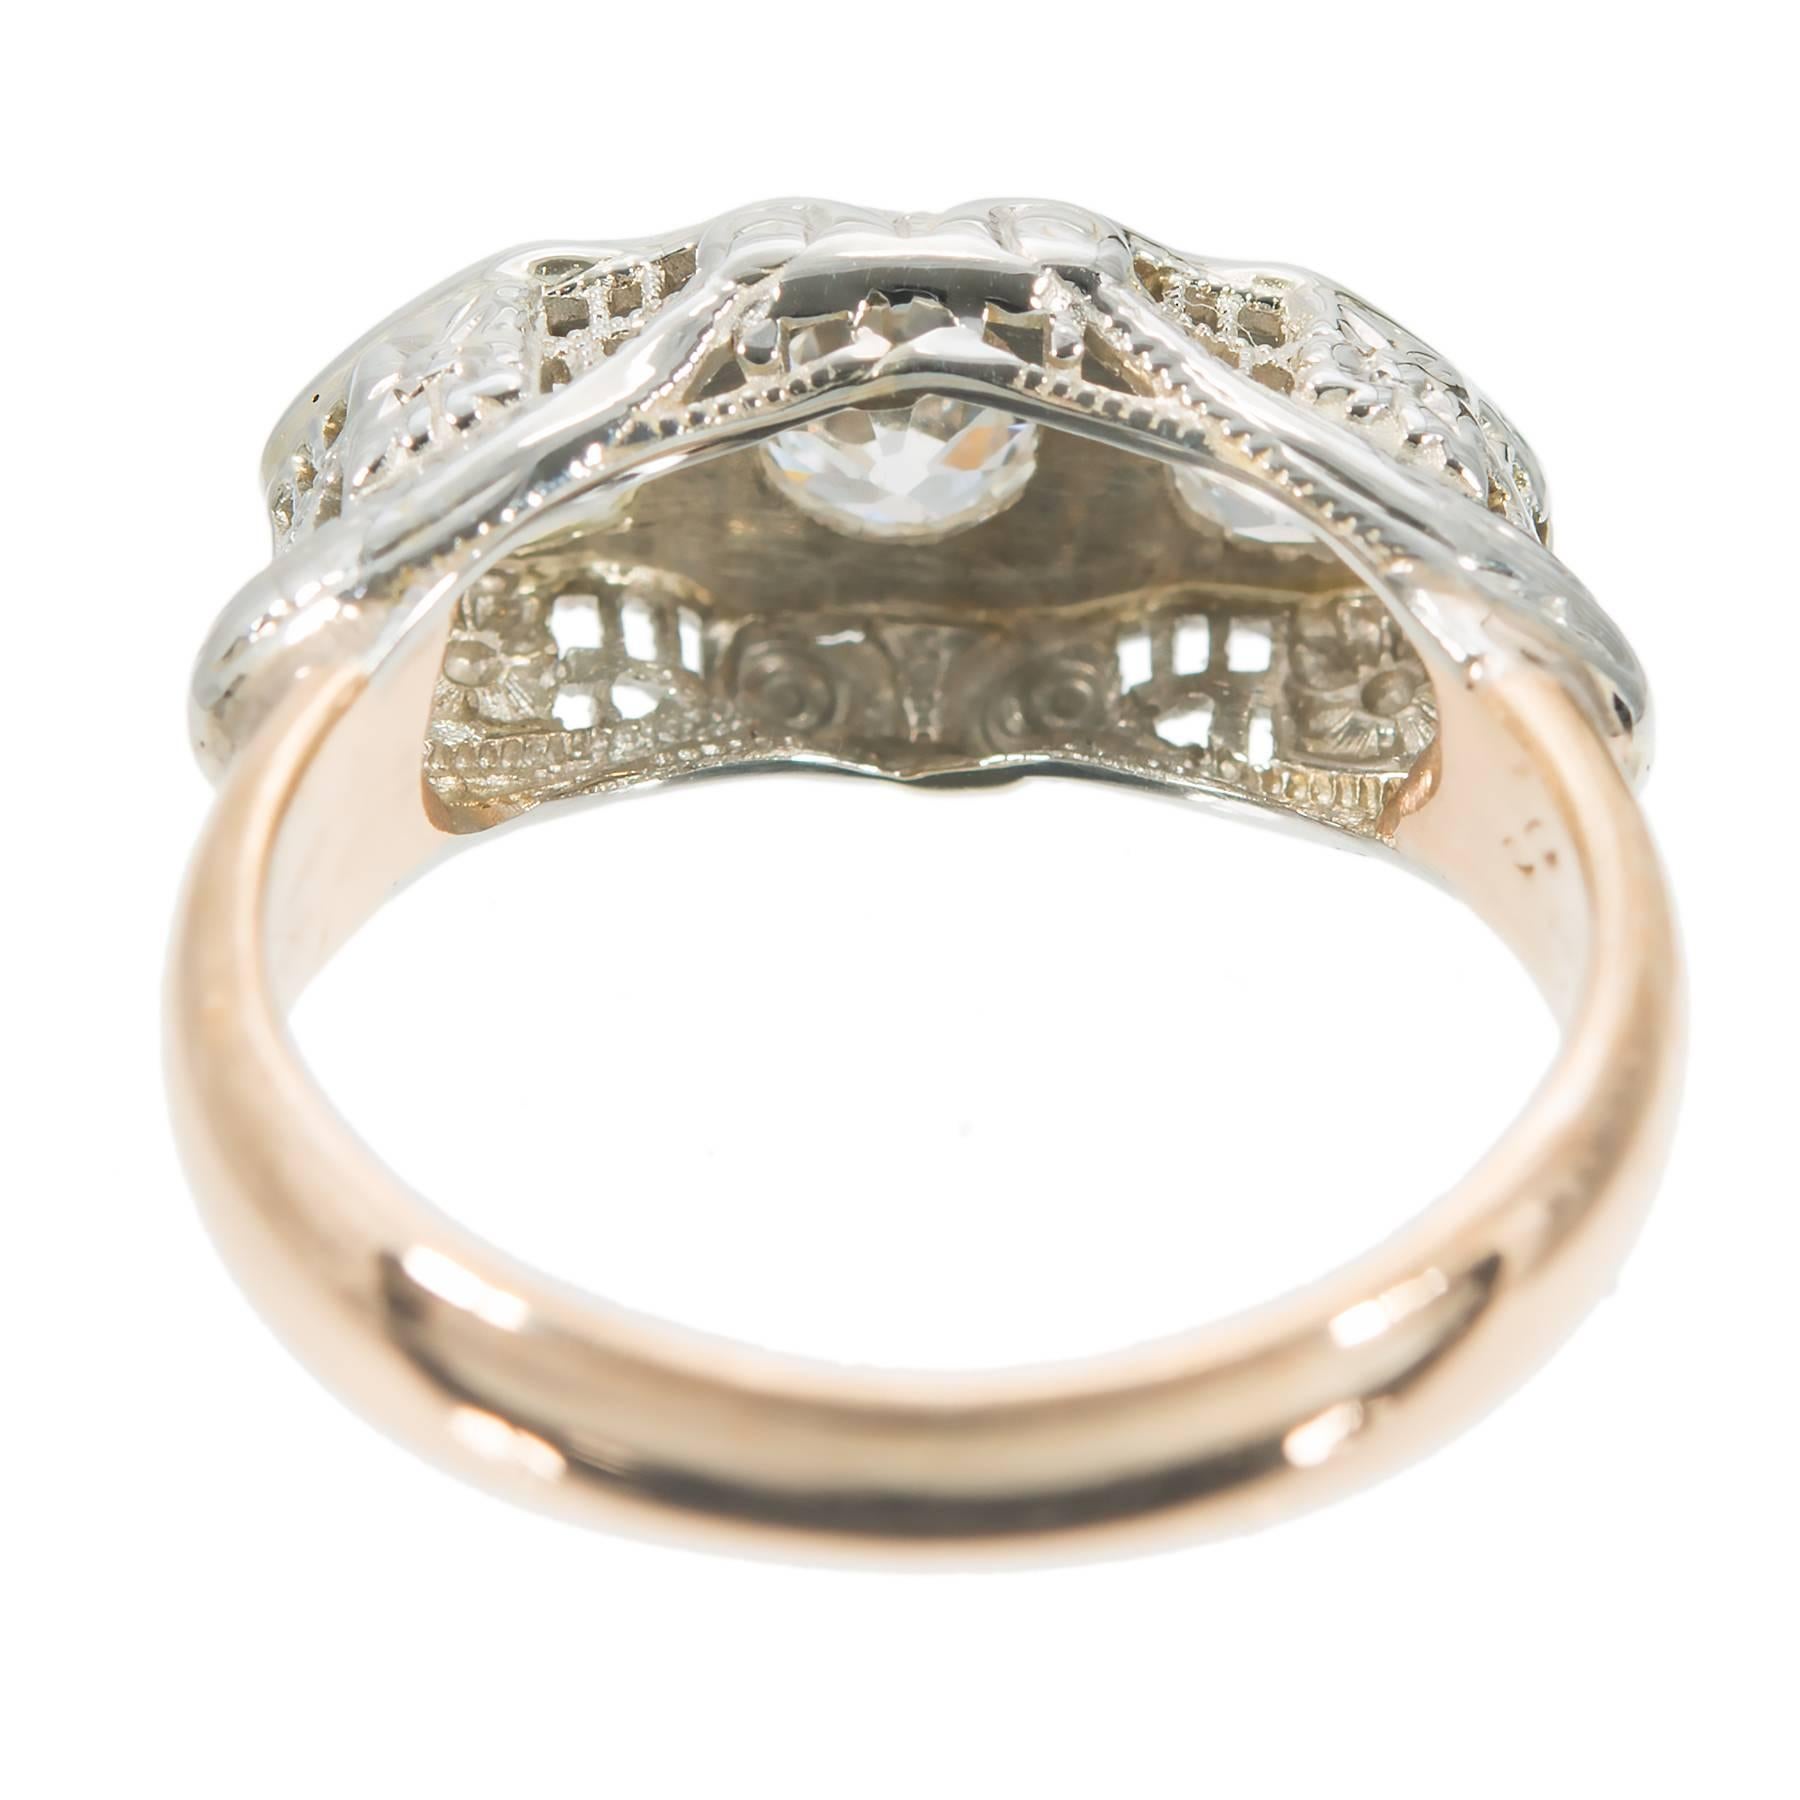 1920's white and yellow gold filigree engagement ring with old mine original diamonds.

3 old mine cut diamonds. Center approx. total weight .33cts, cushion cut. Sides: .21cts each, I to J, VS. Total of all .75cts.
14k White Gold
14k Rose Gold
Top